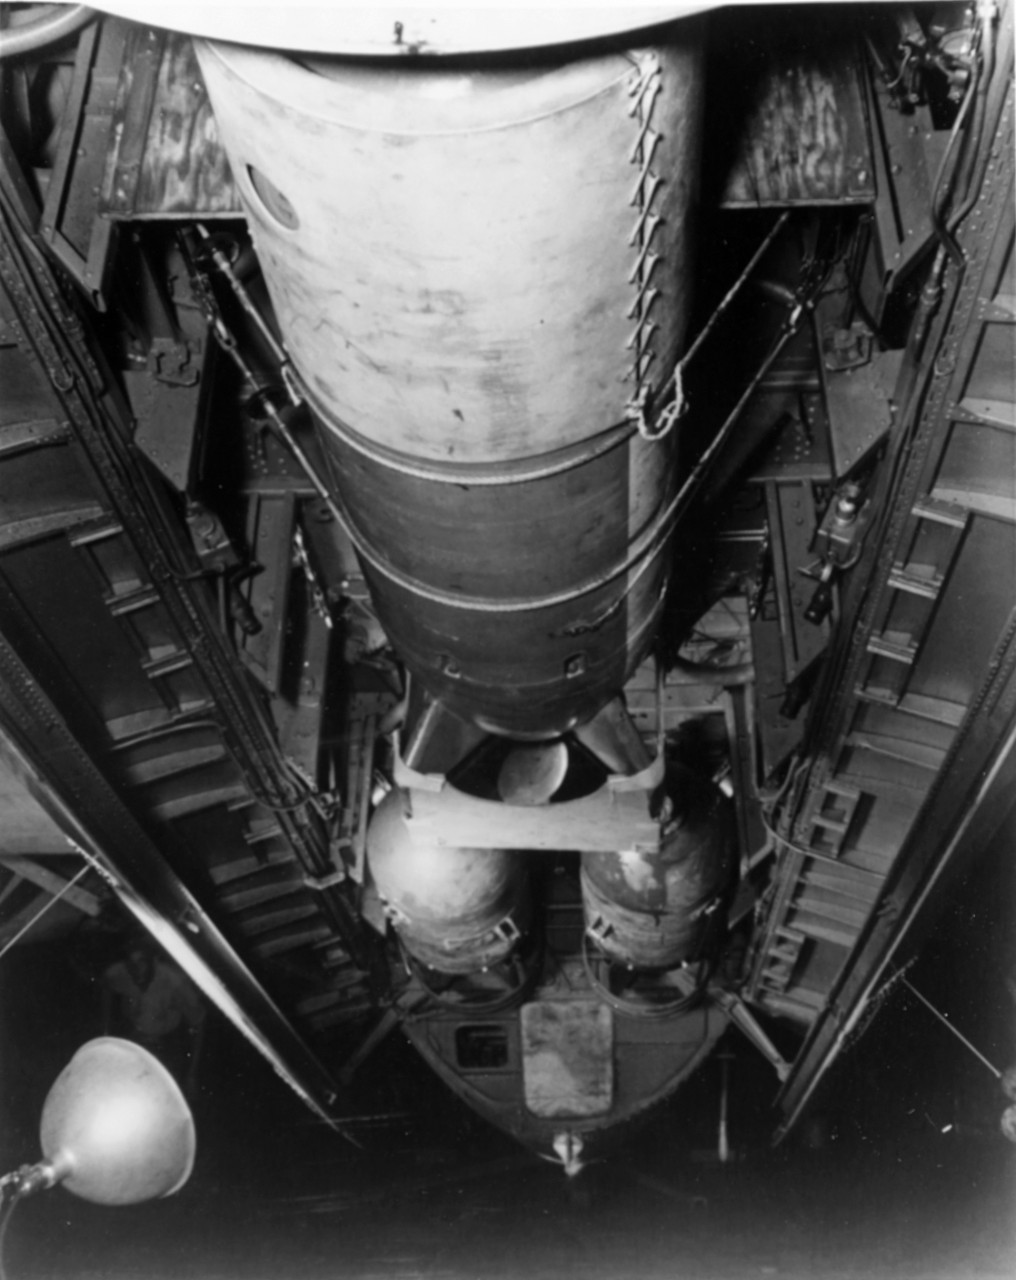 02 The Mark 24 homing torpedo (or Fido) in the bomb bay of an Aveger. Behind it are two depth charges. (USNHHC)